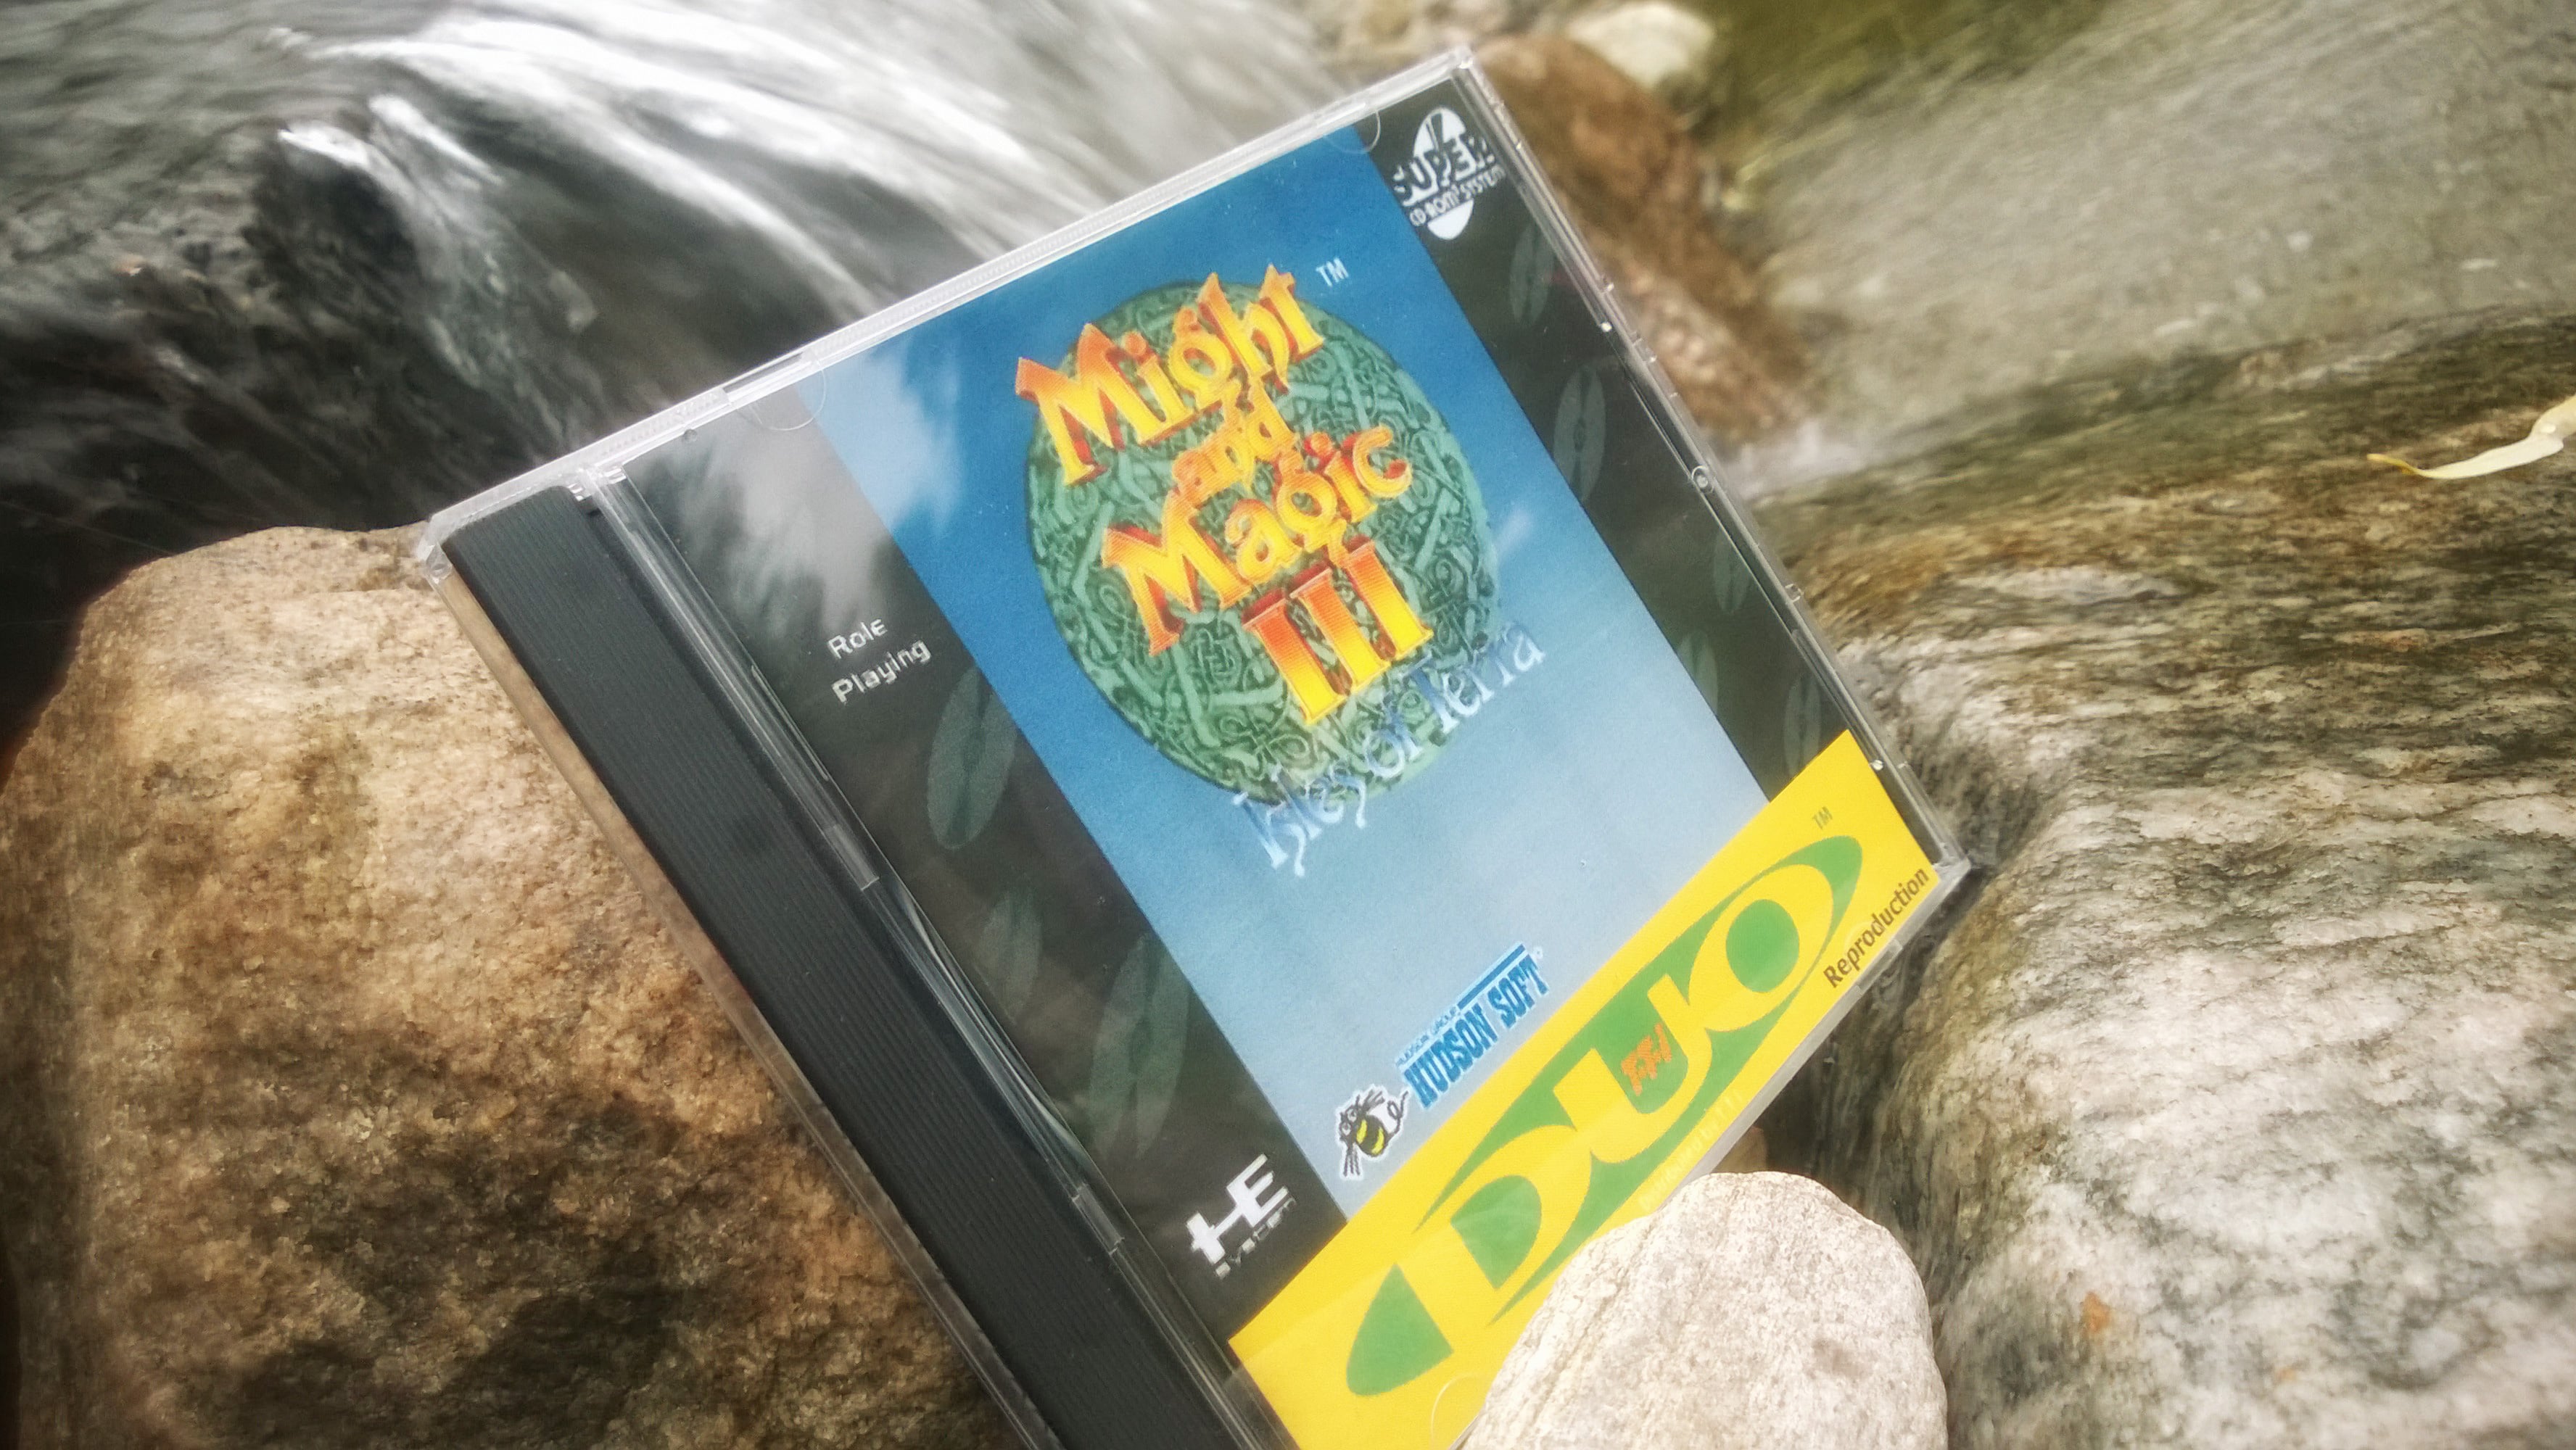 Might and Magic III: Isles of Terra Reproduction Added